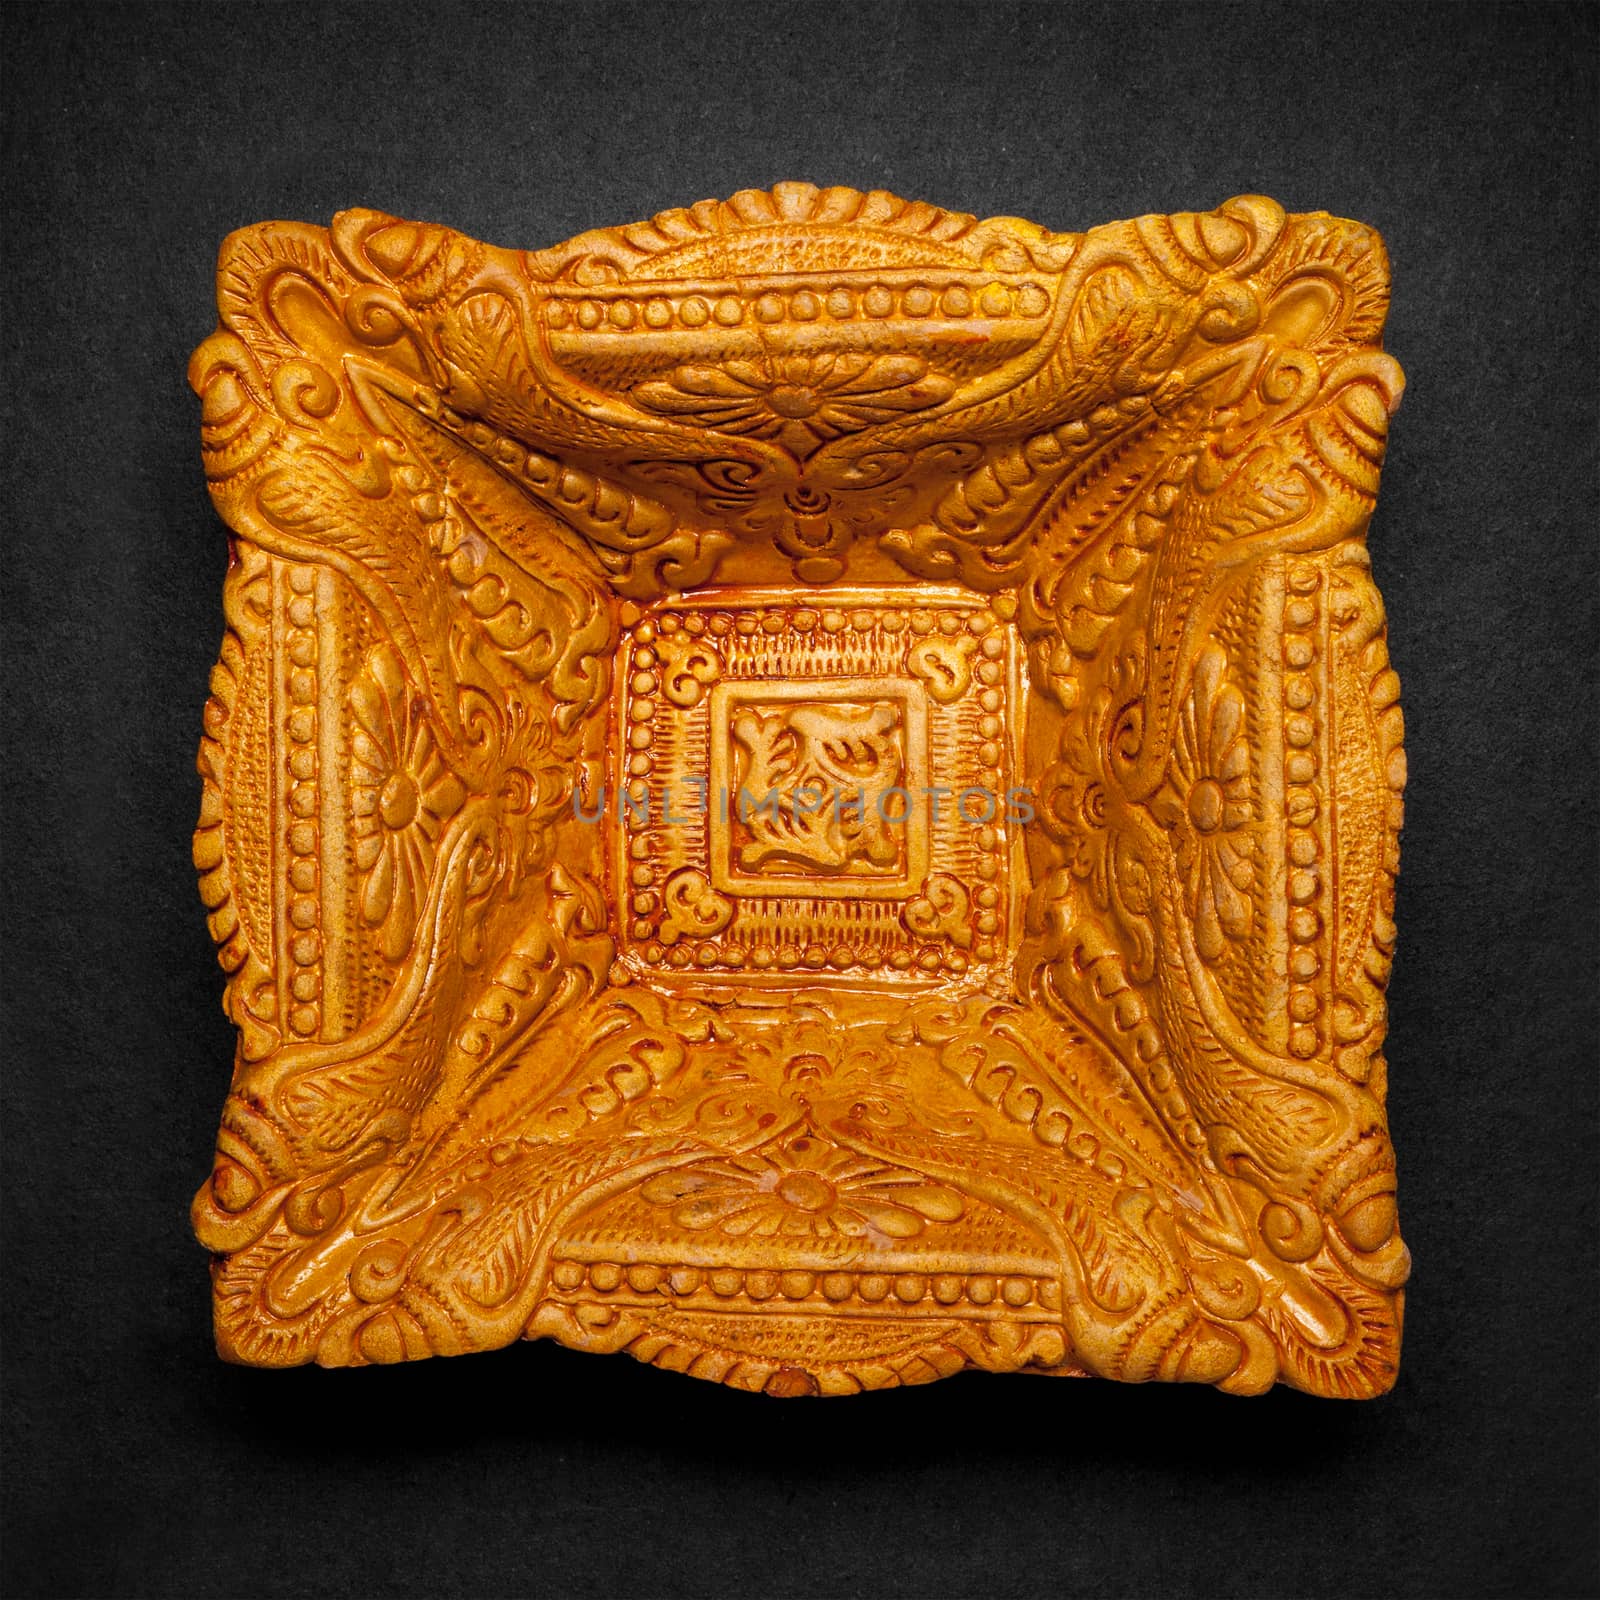 Top view of a beautifully carved designer handmade clay lamp on dark background.